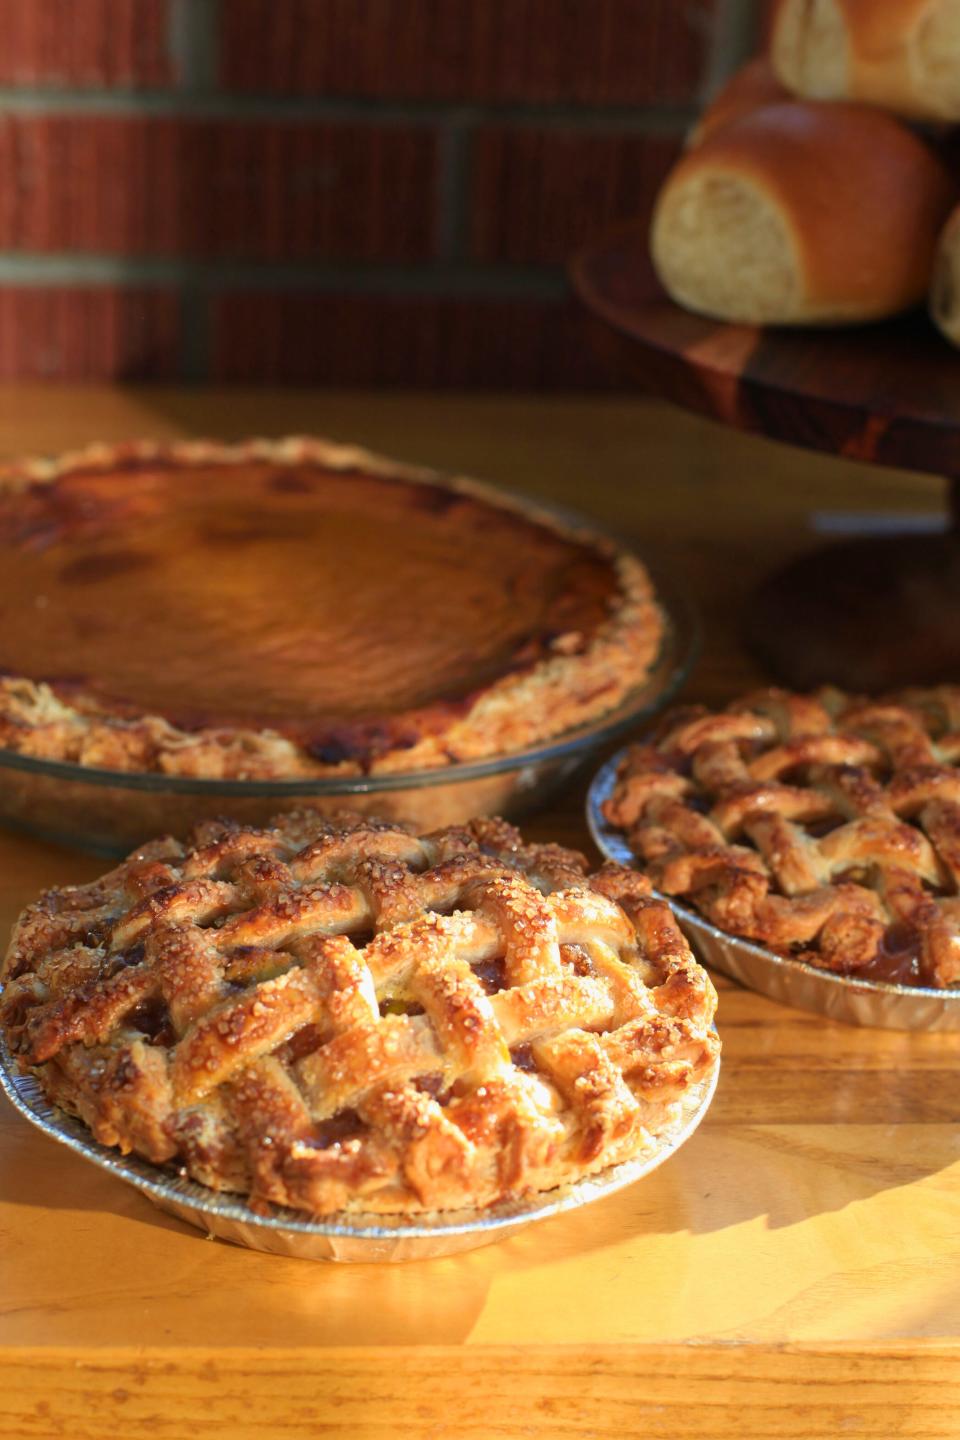 All Day Darling is offering pies and rolls for preorder for Thanksgiving Day.